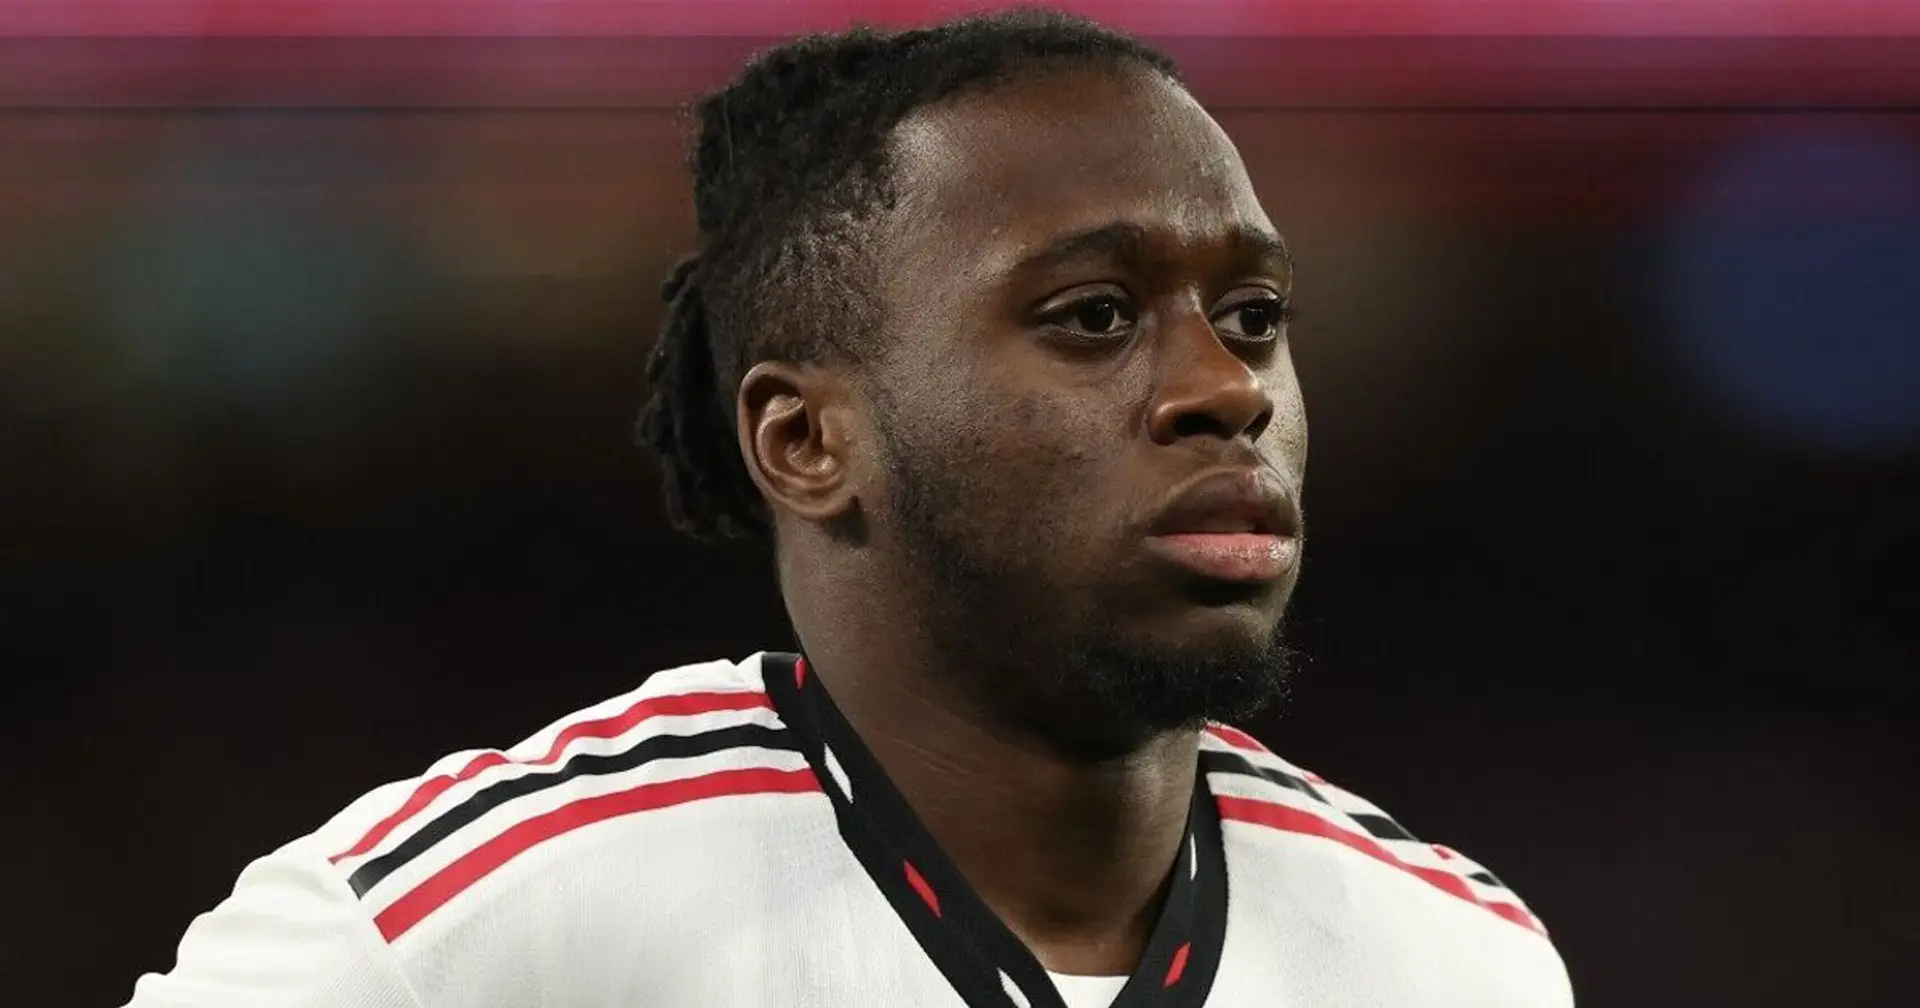 Crystal Palace reignite interest in signing Wan-Bissaka on loan (reliability: 4 stars)